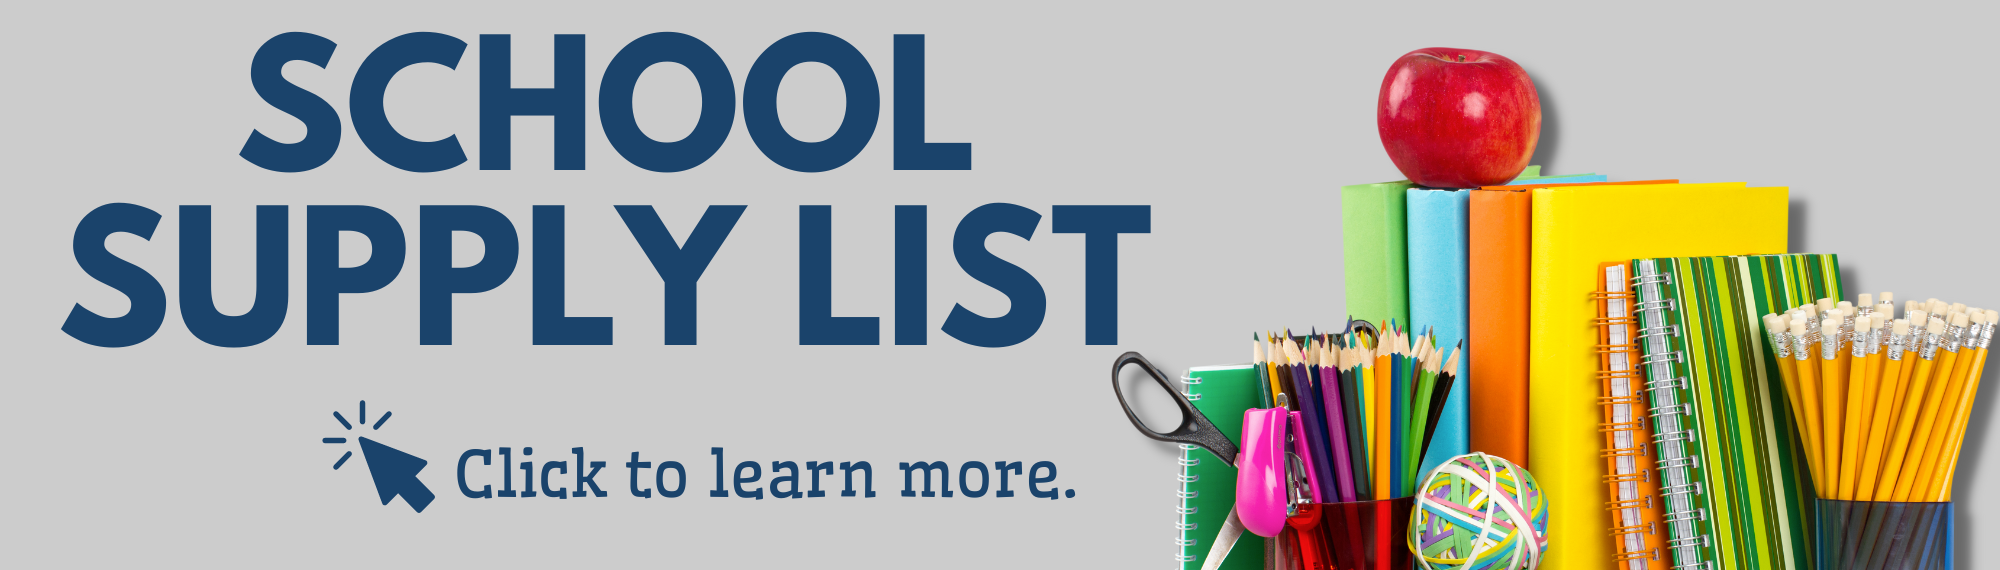 School Supply List - Click to learn more.